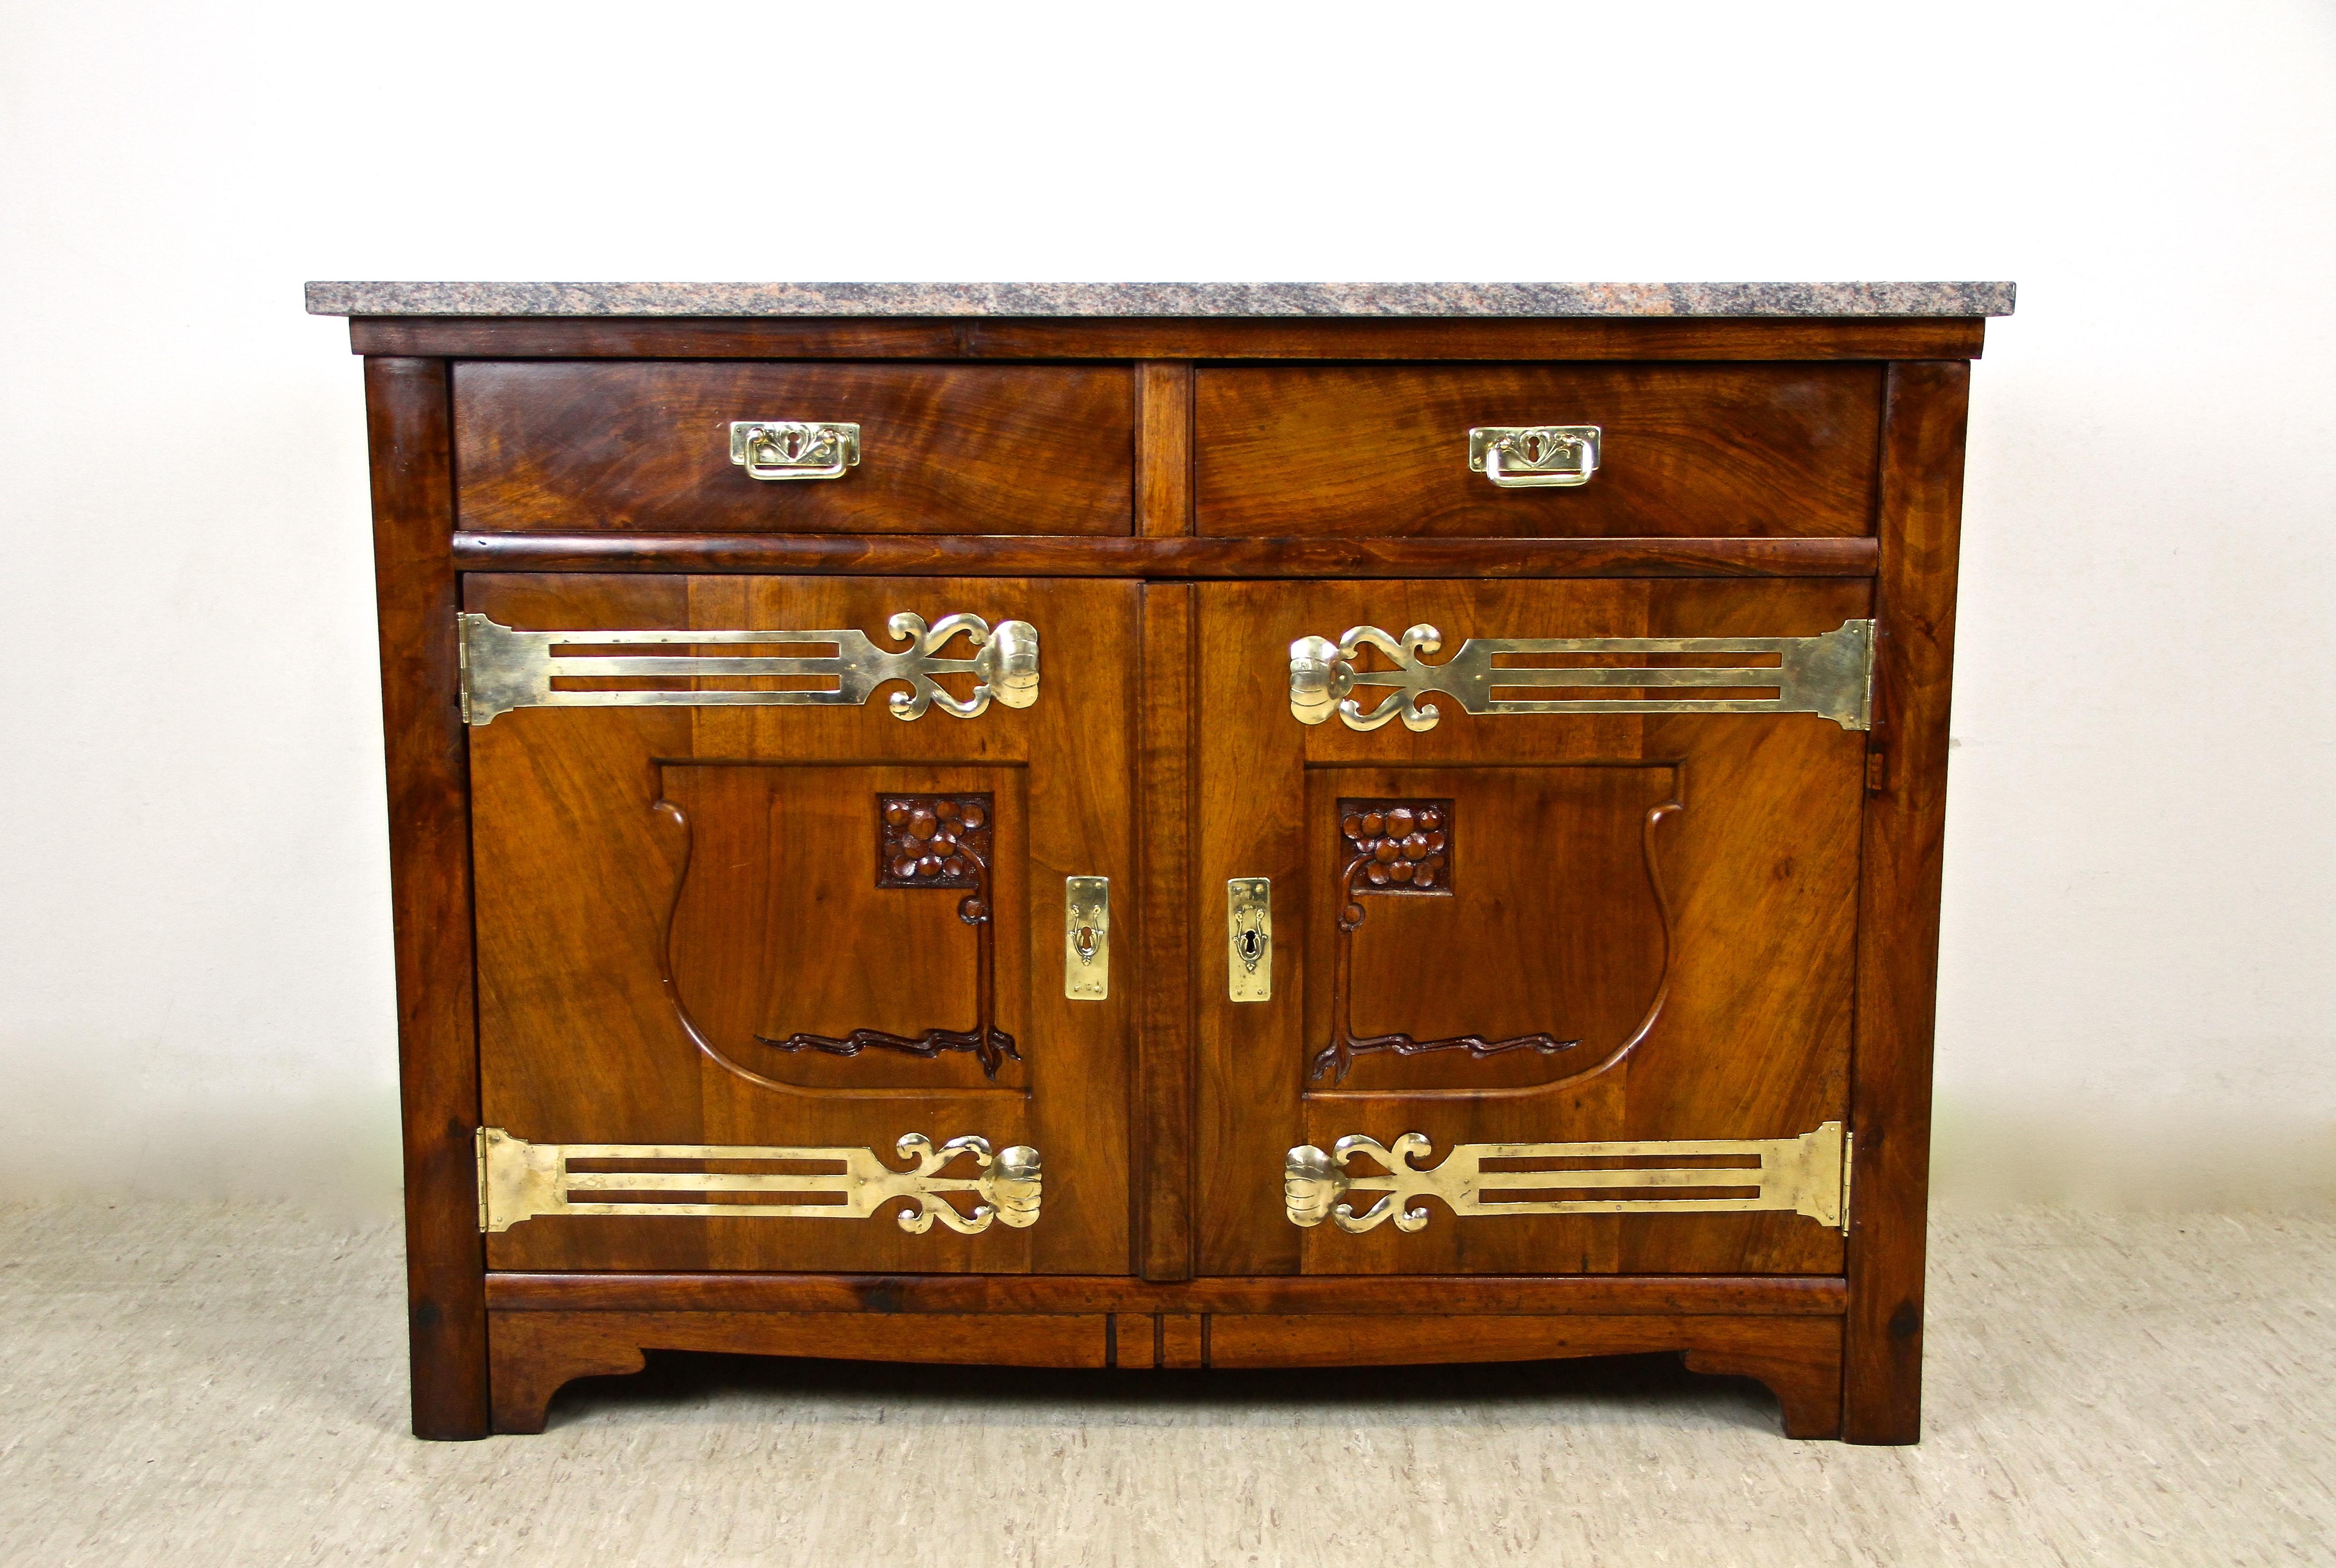 Lovely Art Nouveau Nutwood commode/ dresser from the beginning of the 20th century in Austria. Made around 1905, this eye-catching piece of a commode is adorned by fantastic brass applications. The doors can be wide opened and are decorated by